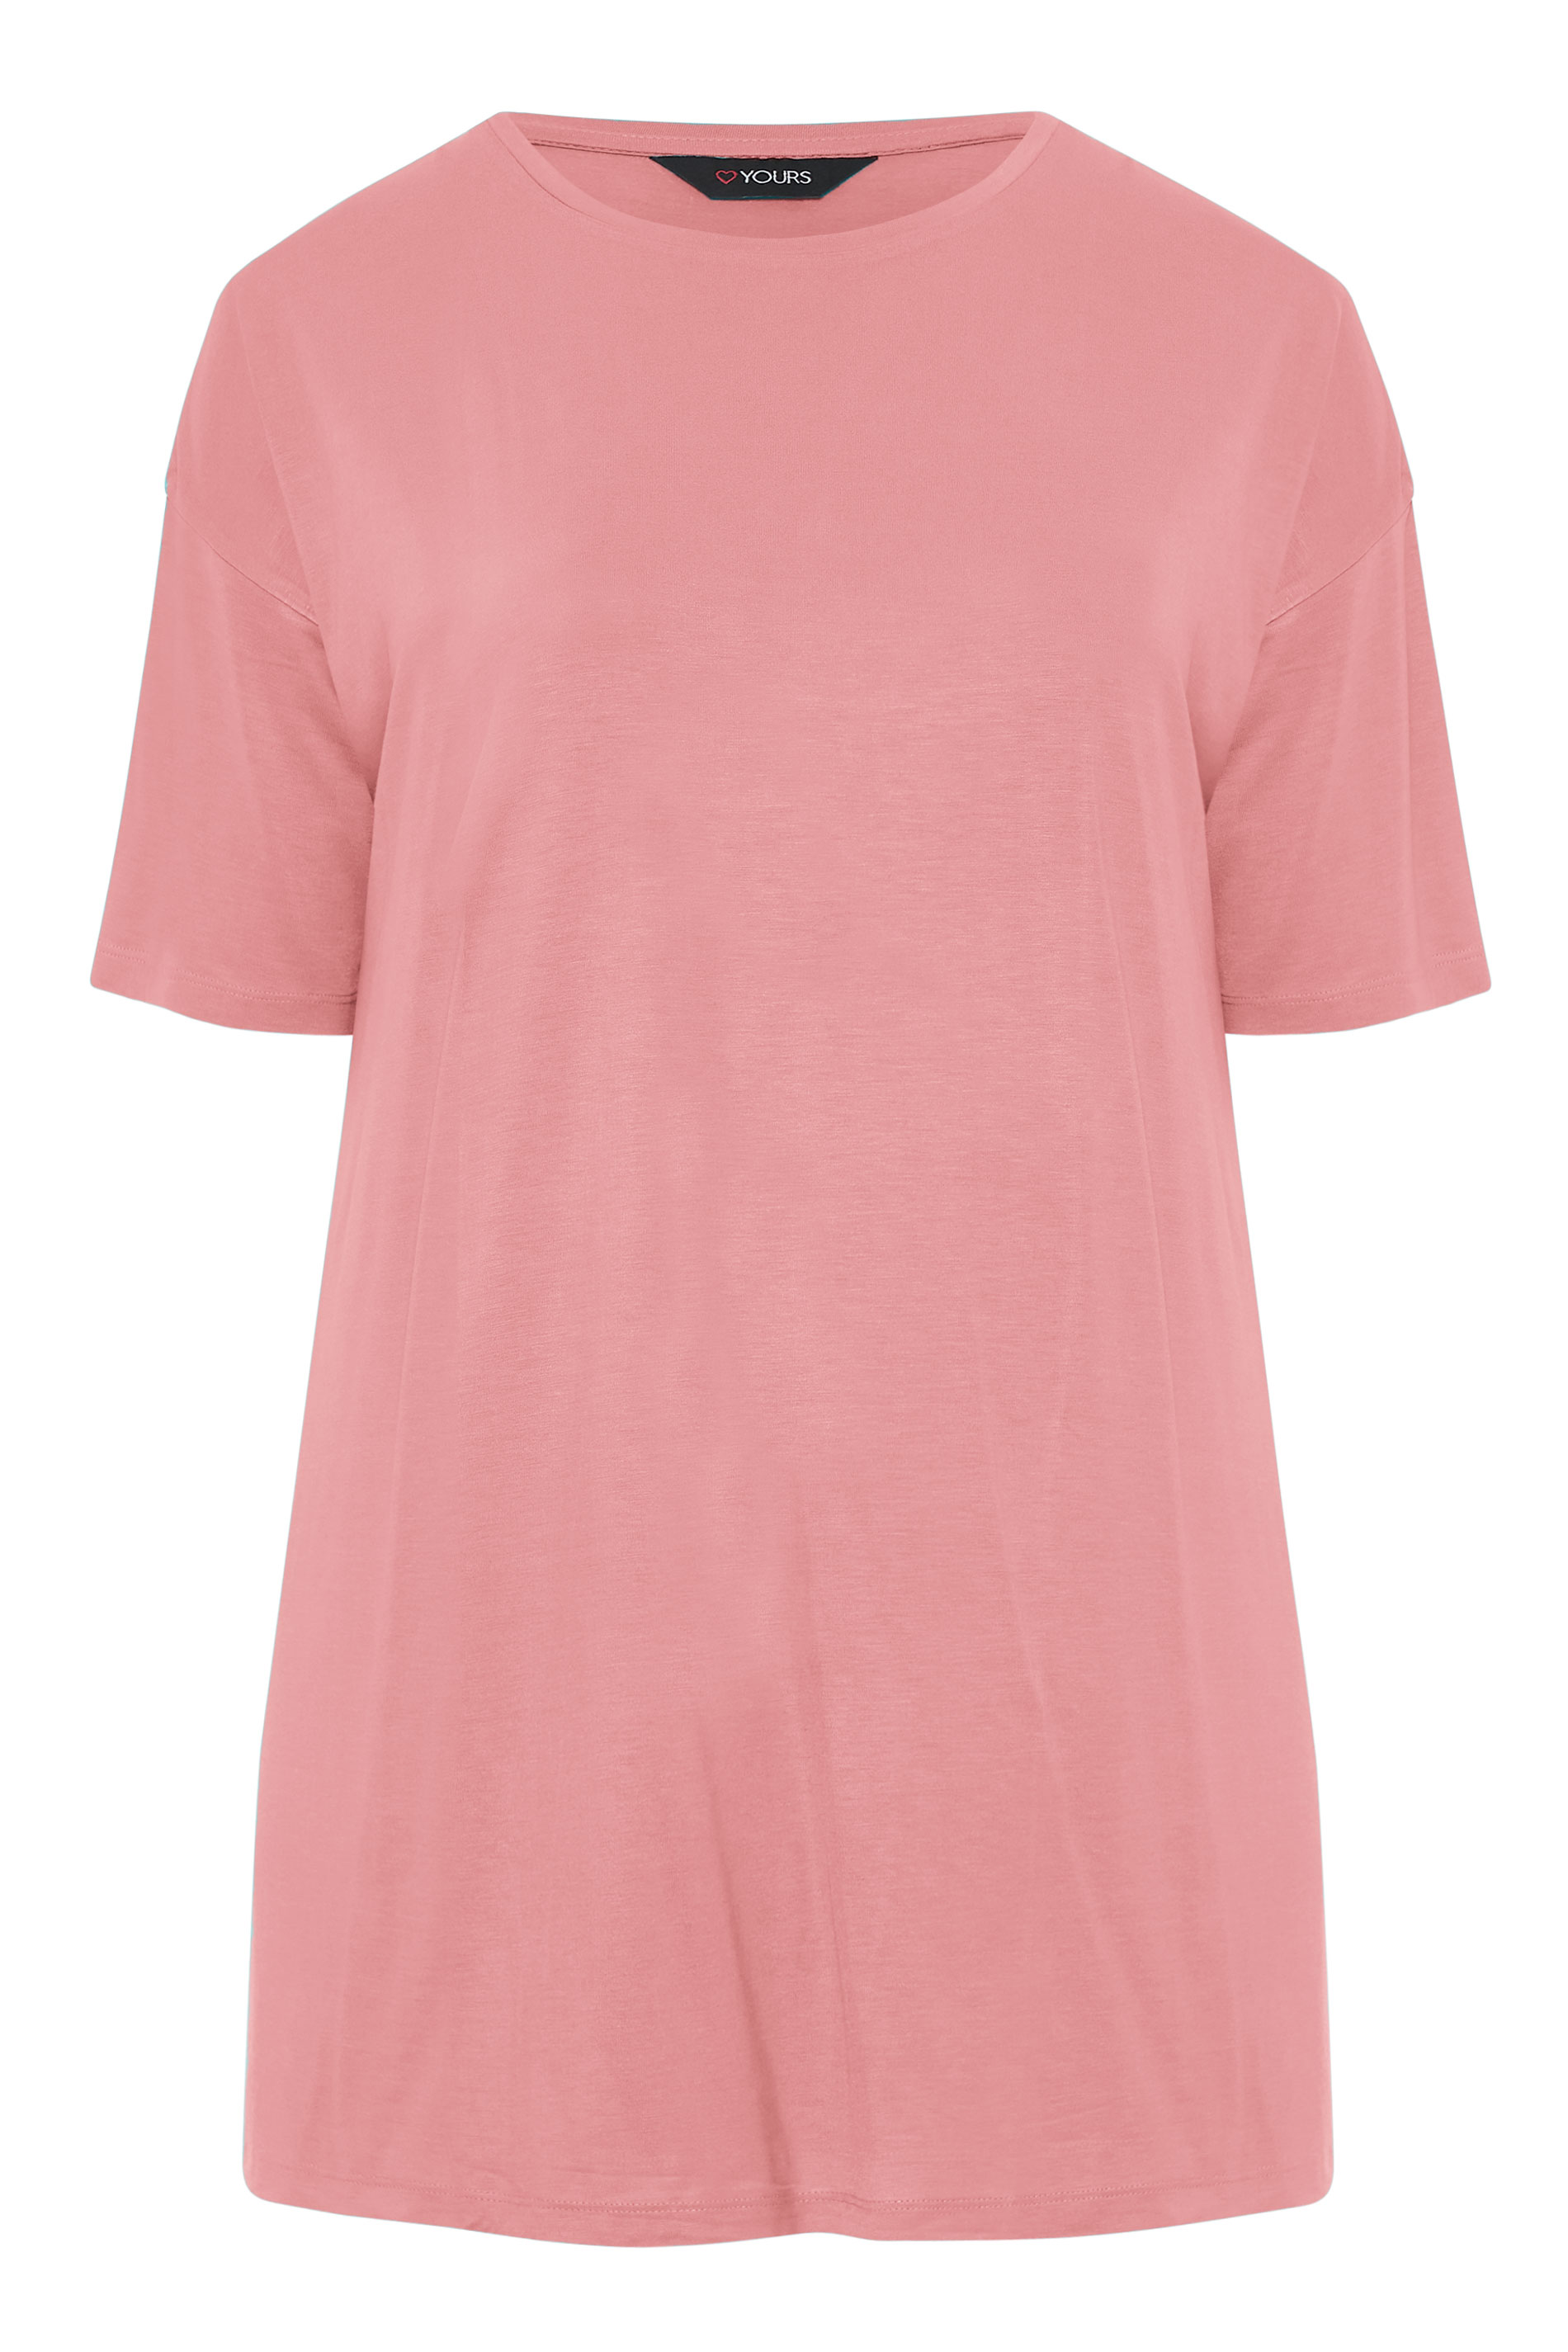 Rose Pink Oversized T-Shirt | Yours Clothing